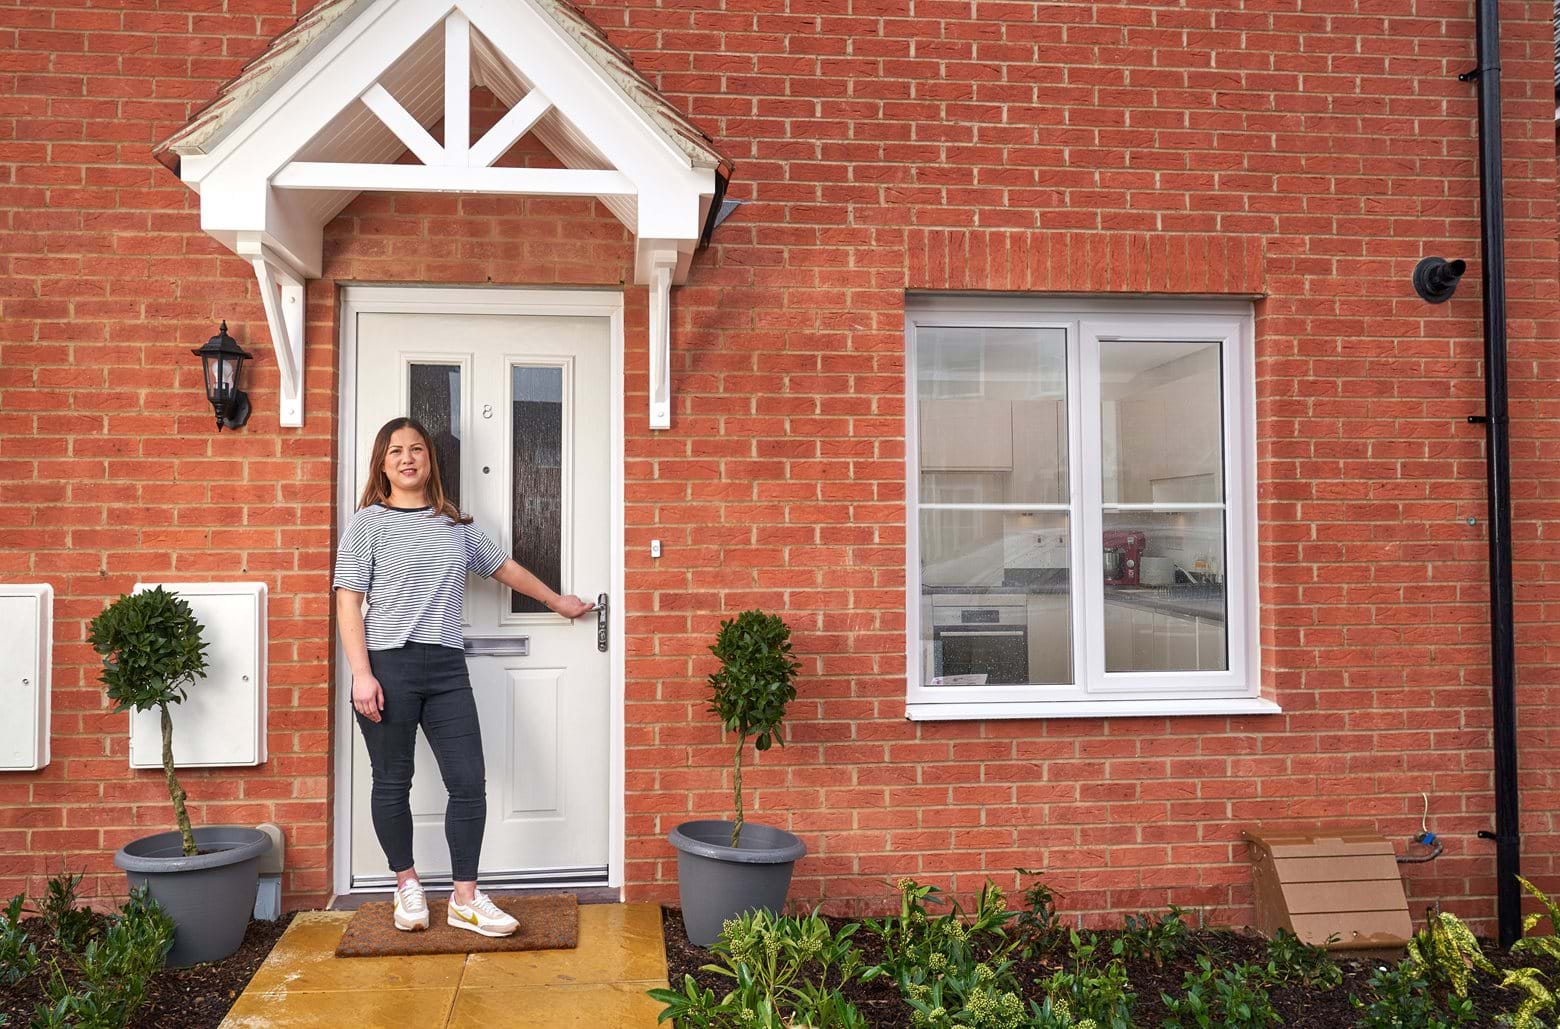 Leanda, used Shared Ownership to step onto the property ladder at Limebrook Walk, Maldon